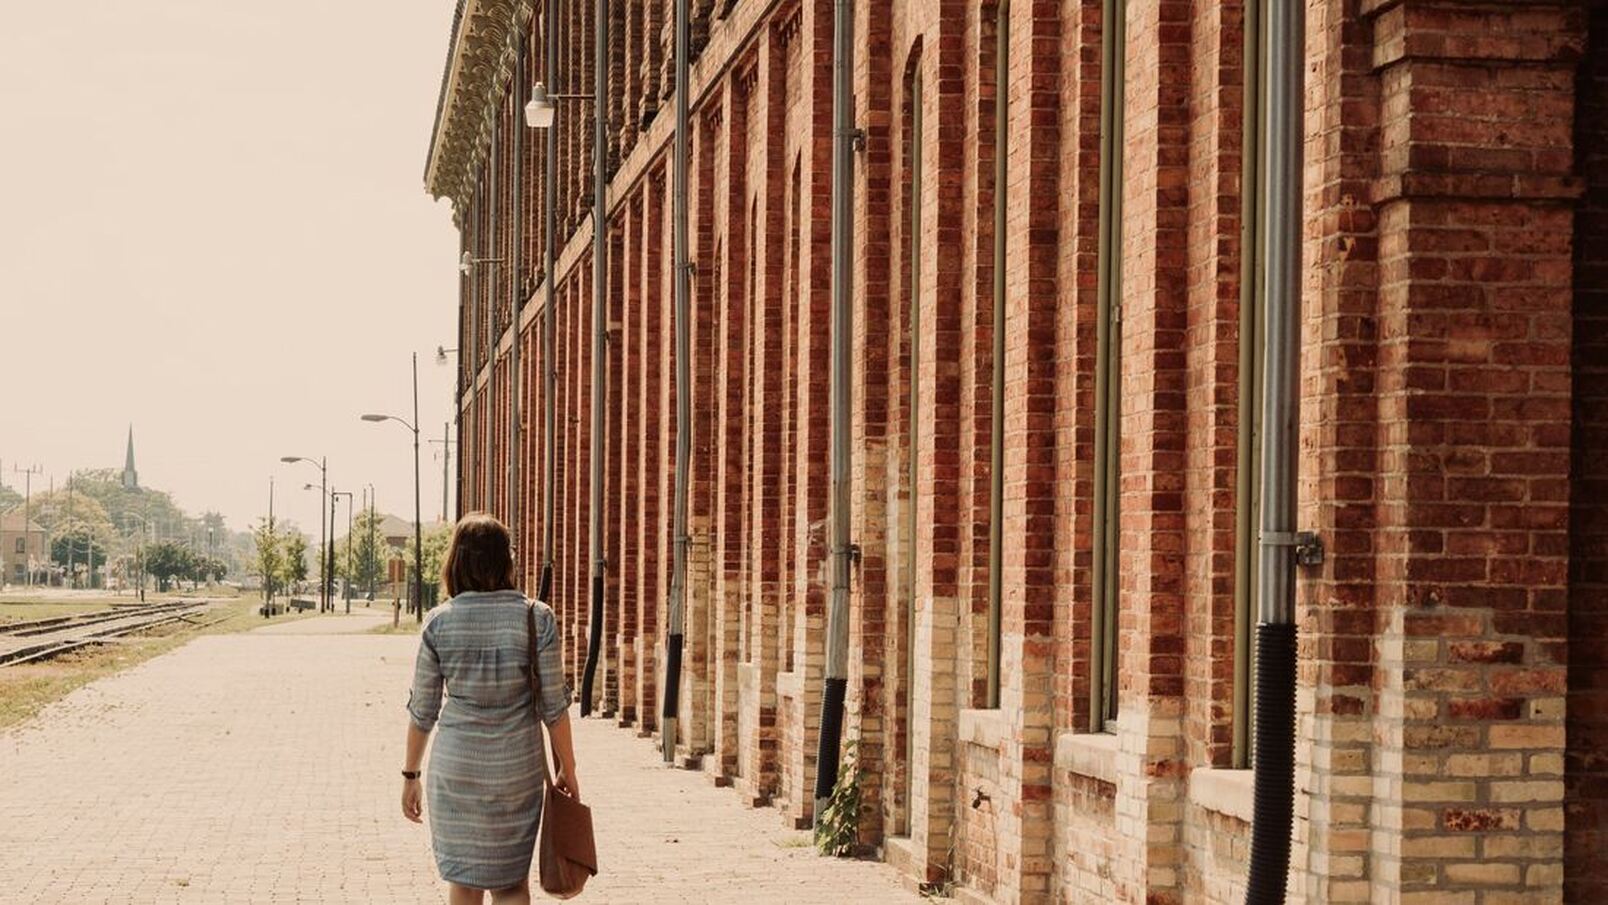 Here is a lady walking beside the CASO Station. The CASO Station is covered in red brick and each window has an olive green frame. The lady is walking with a brown purse on her shoulder and is wearing a blue and white dress. To the left of the shot are some train tracks.